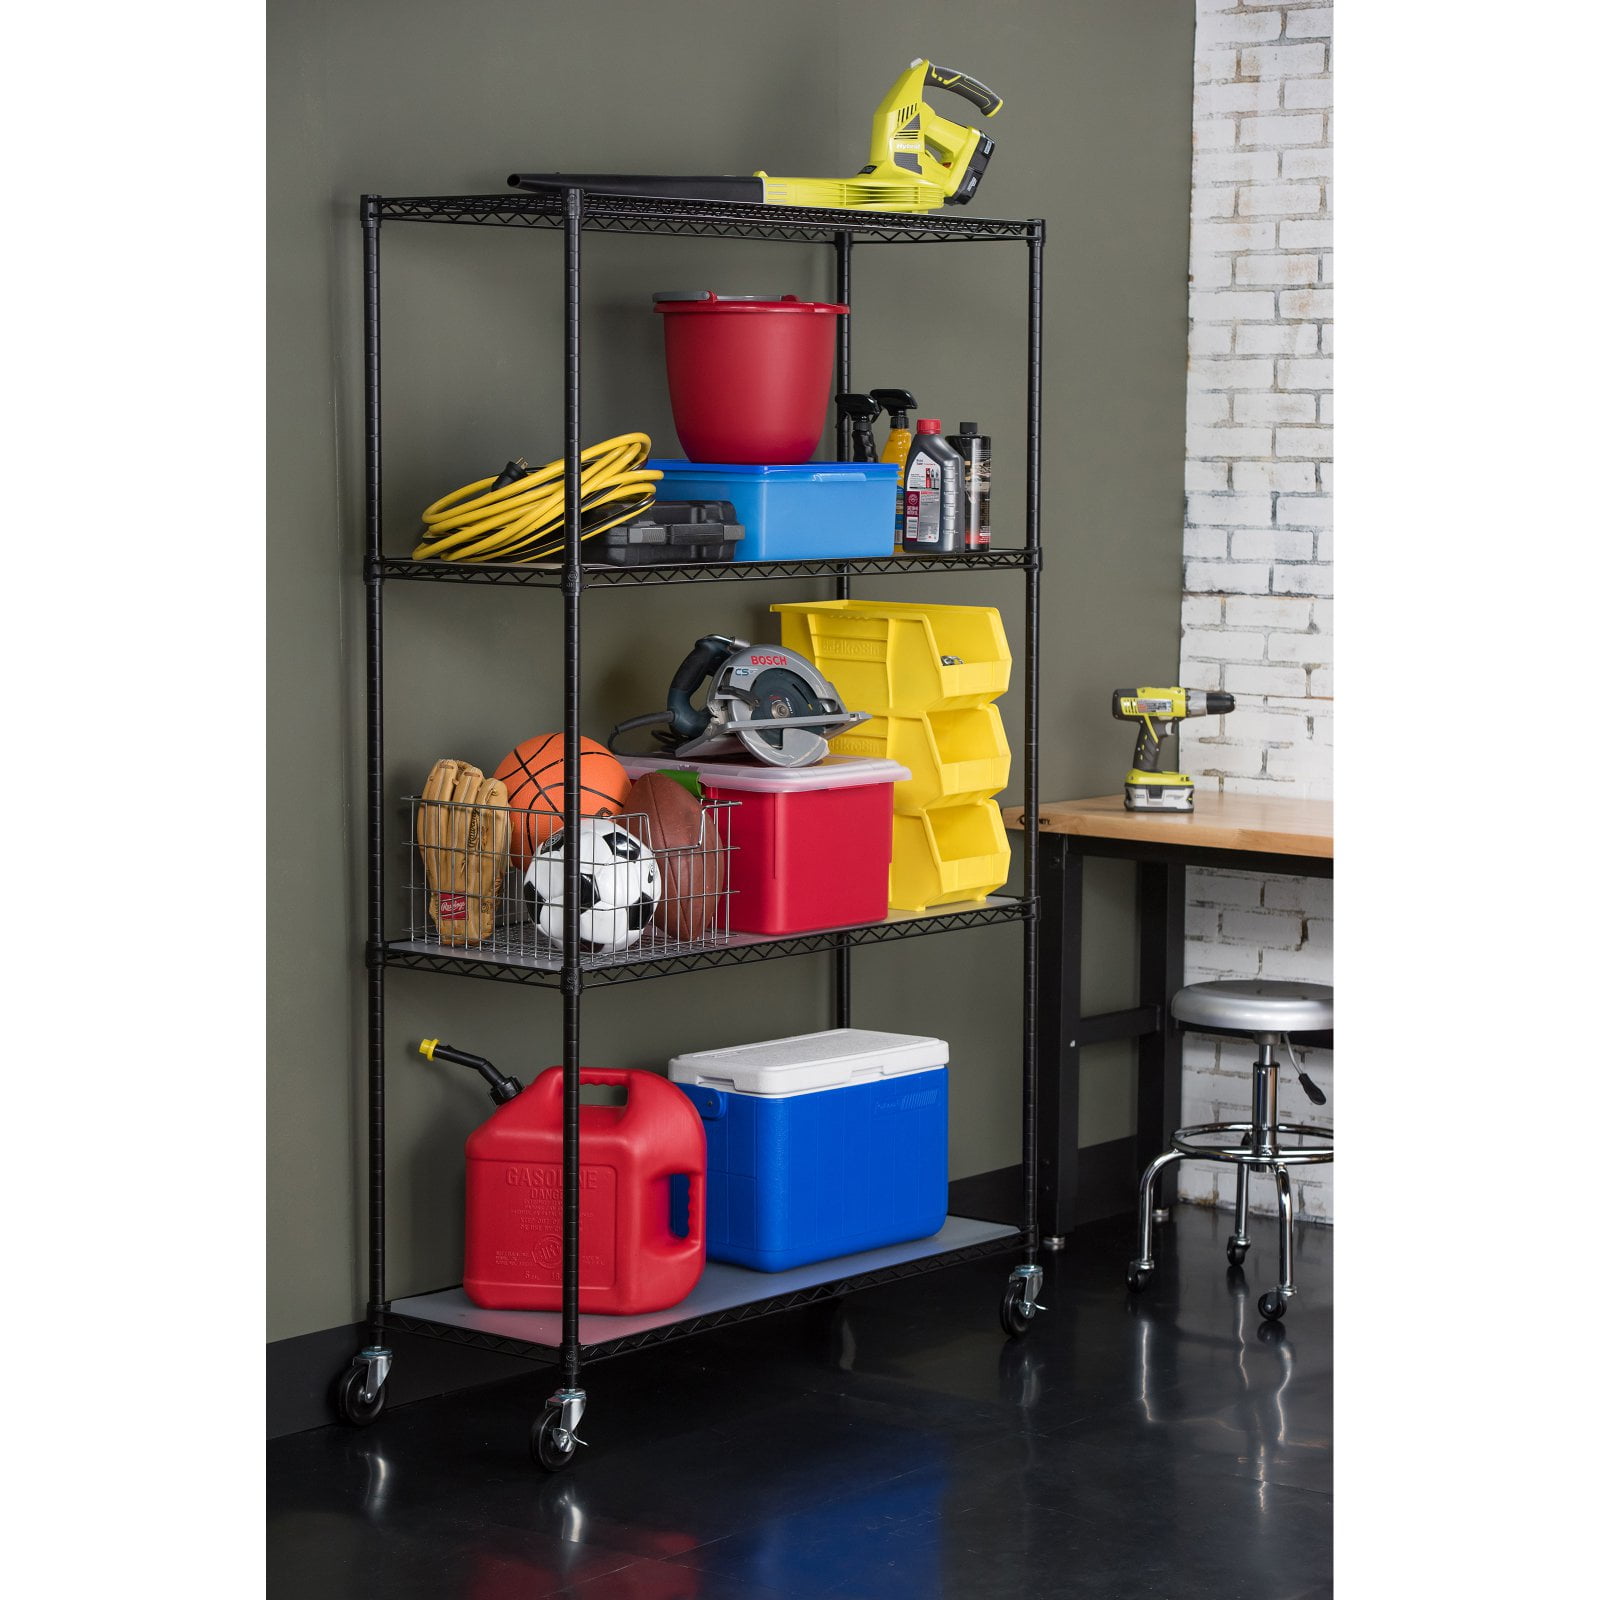 Trinity 4-Tier 36 x 14 x 54 Wire Shelving with Liners, NSF, Black